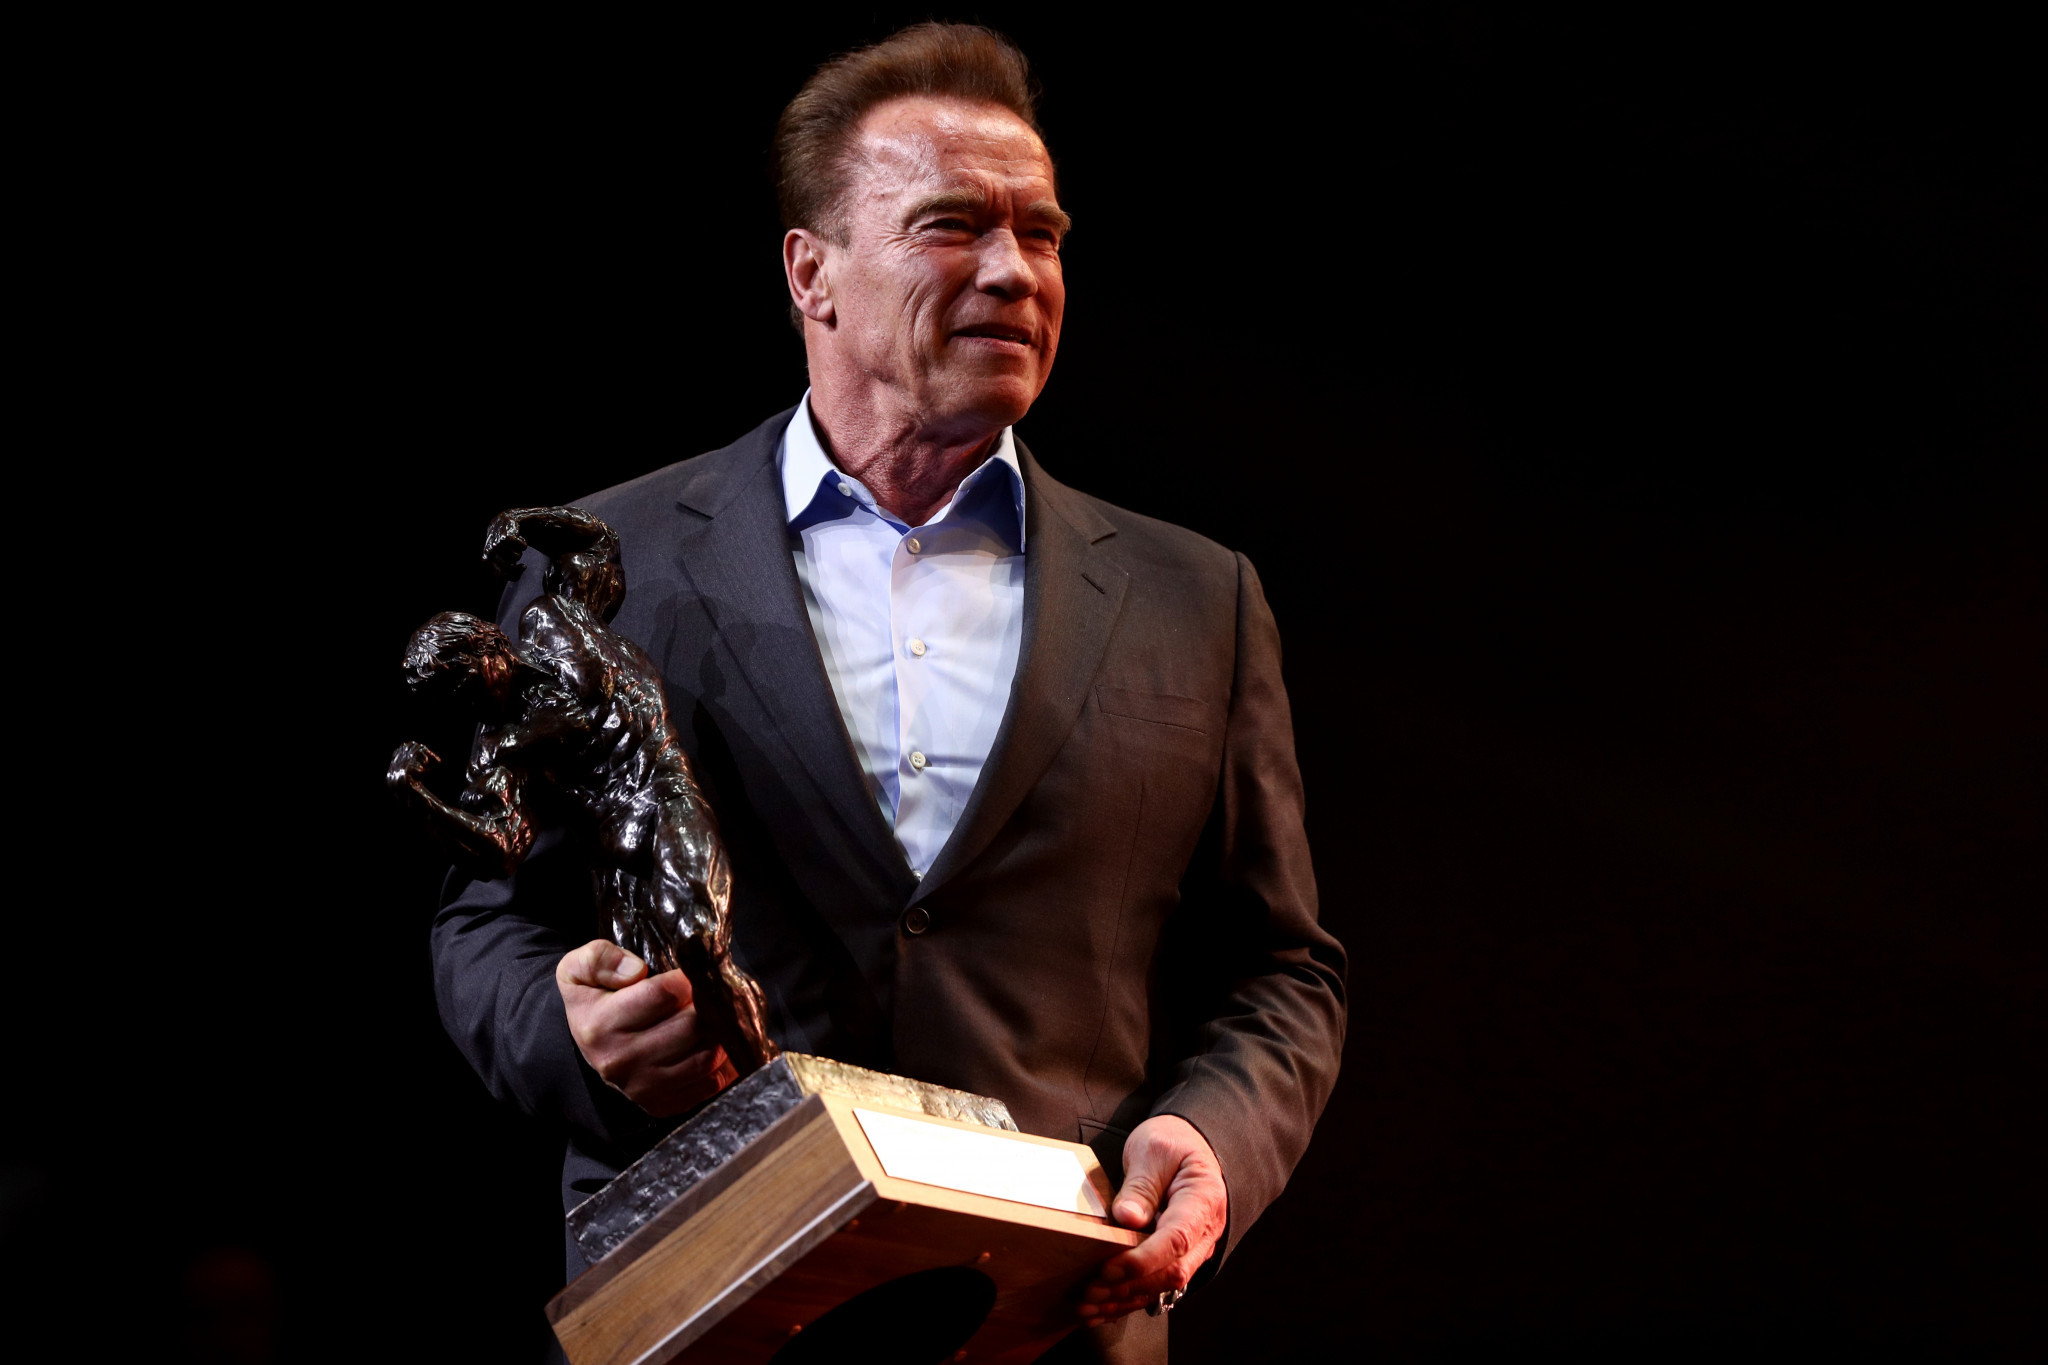 Most spectators will not be able to attend Arnold Schwarzenegger's flagship event this year ©Getty Images